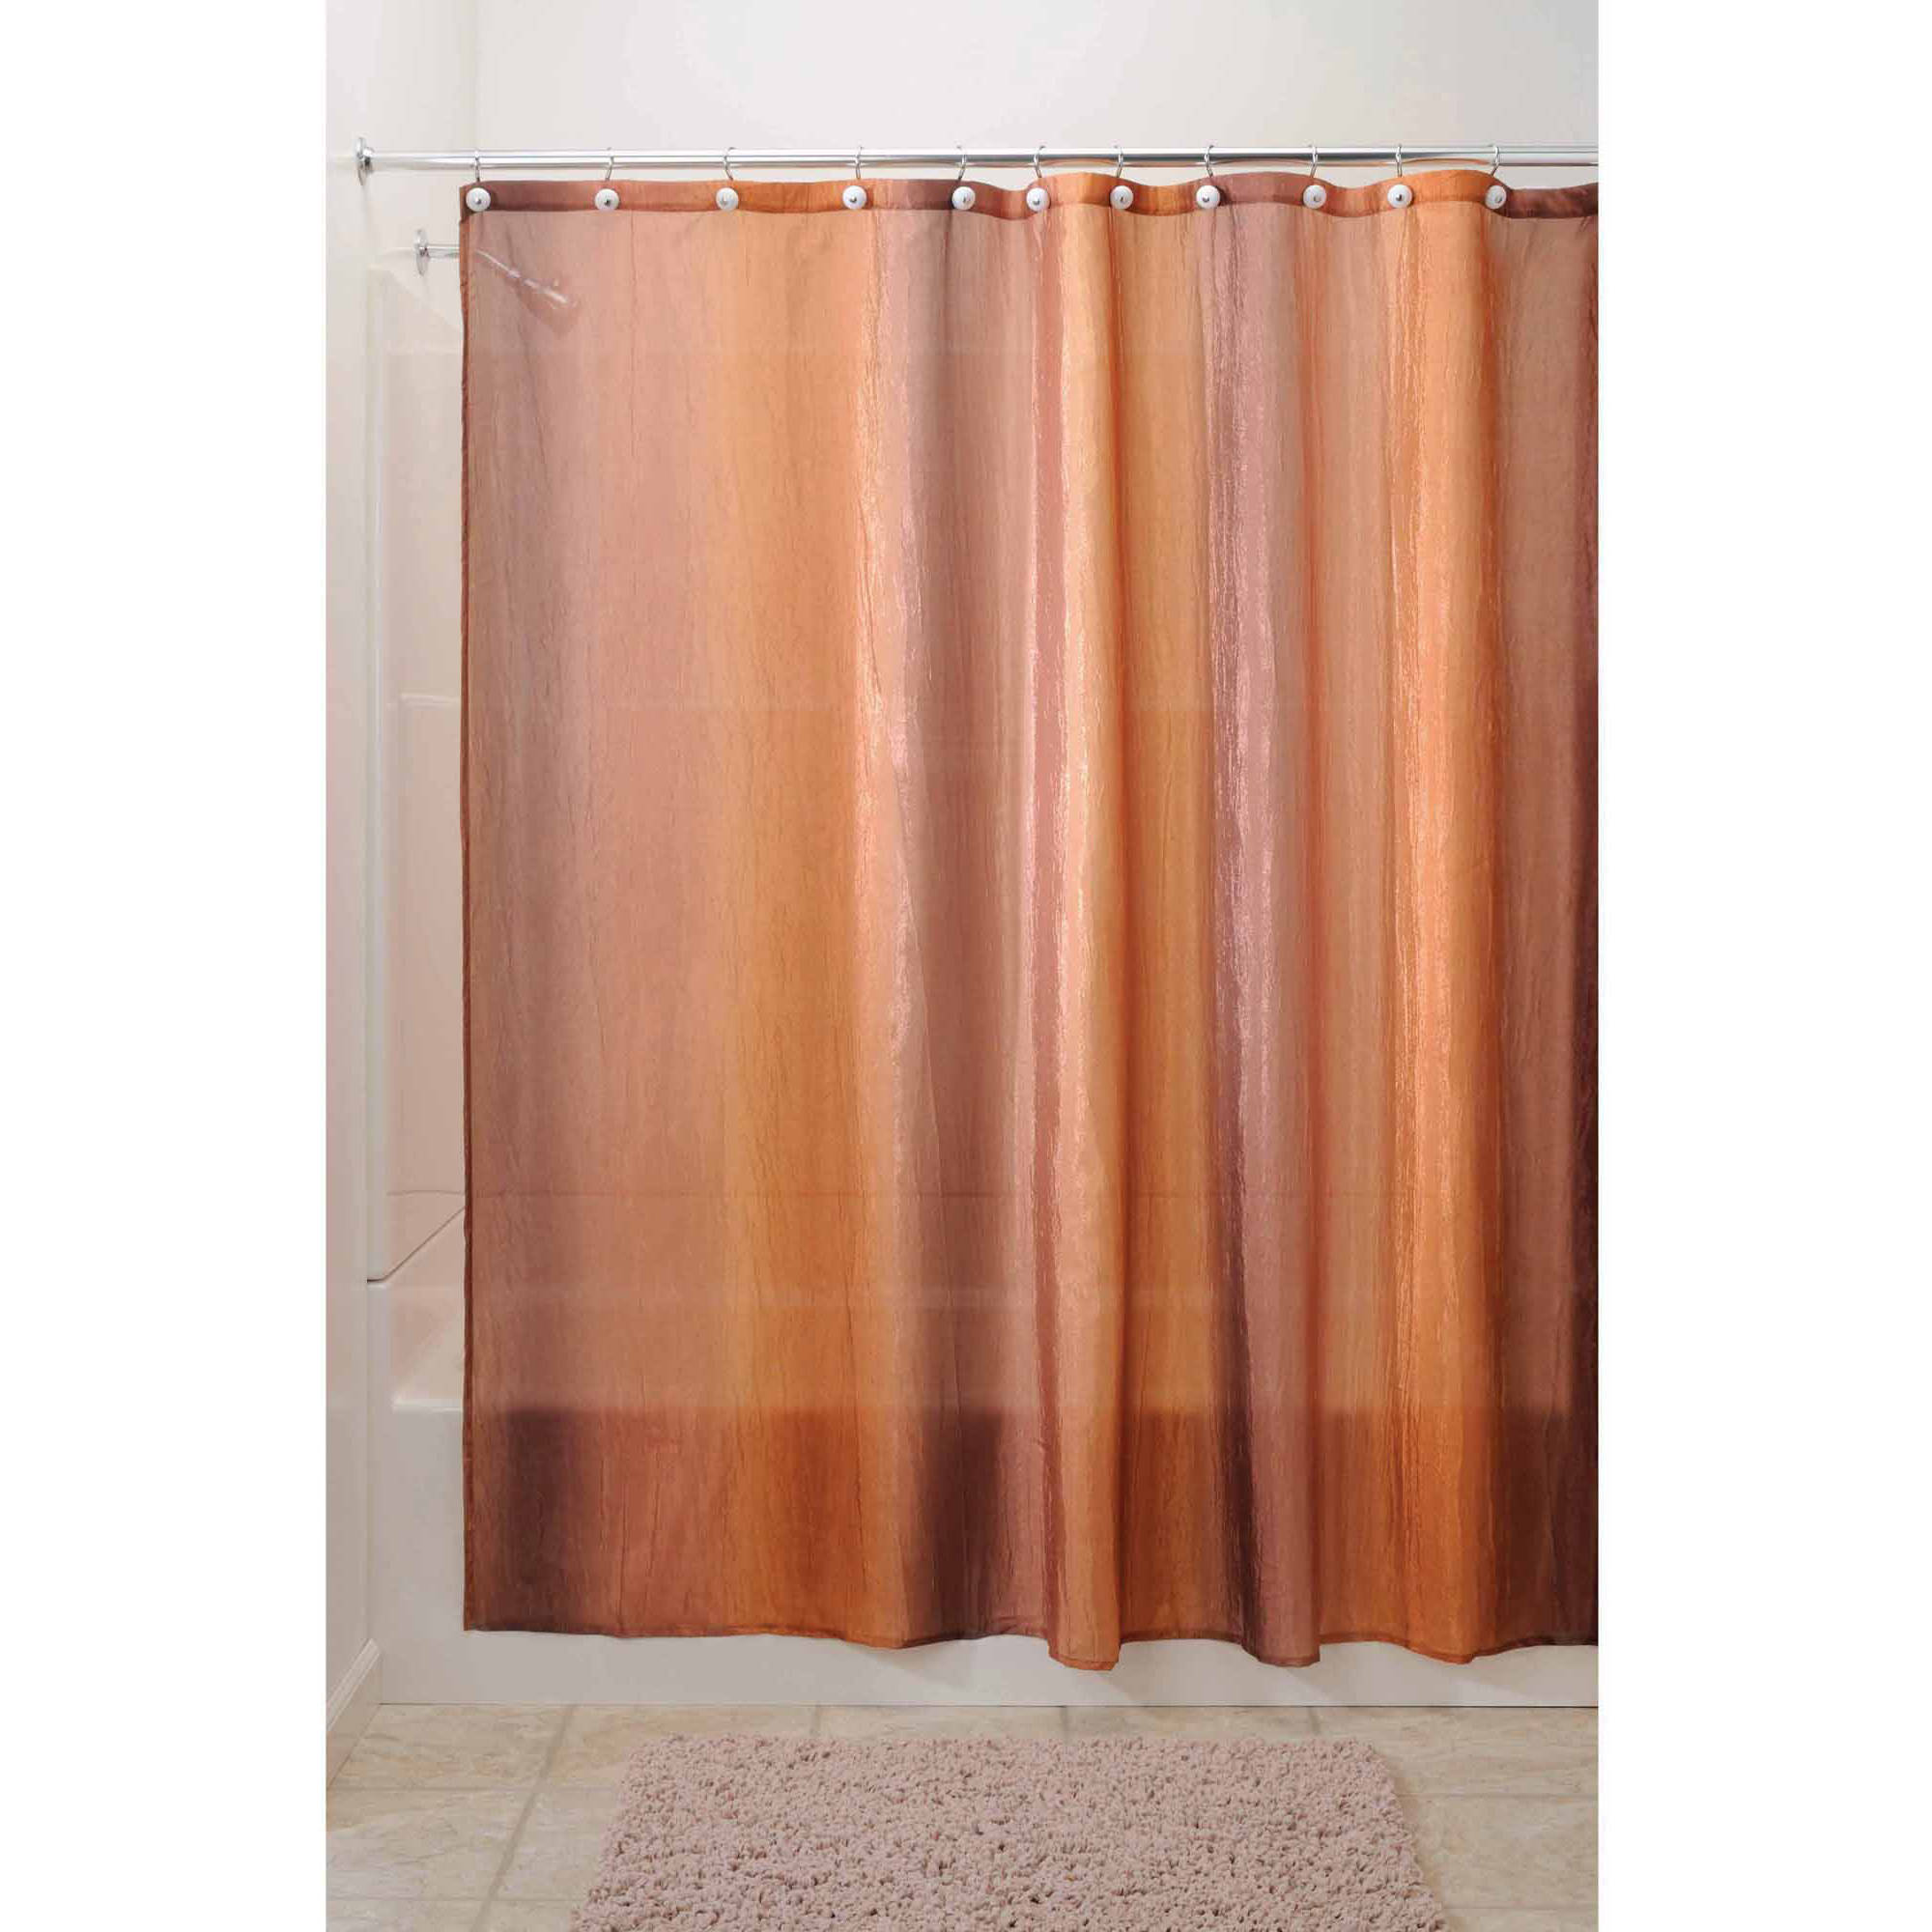 InterDesign Ombre Fabric Shower Curtain, Standard 72" x 72", Brown/Gold - image 1 of 4